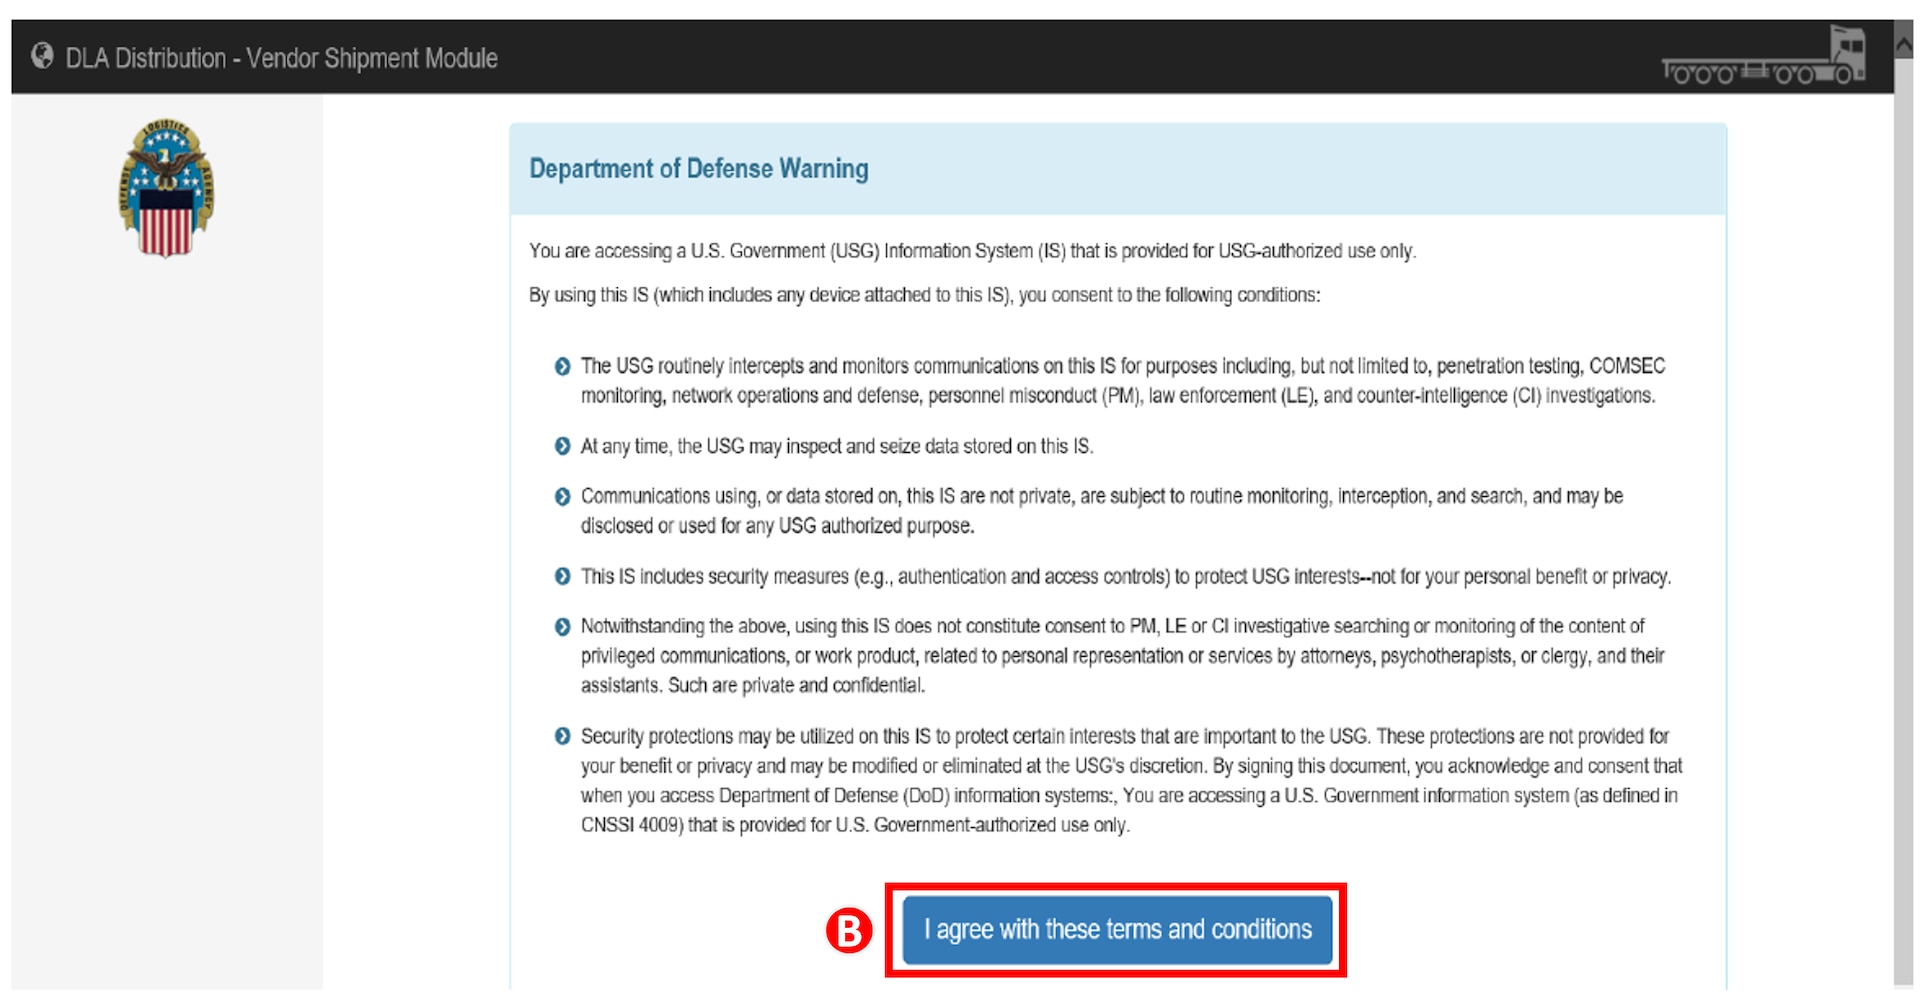 When opening Vendor Shipment Module select the agree to terms and conditions button regarding the Department of Defense Warning.